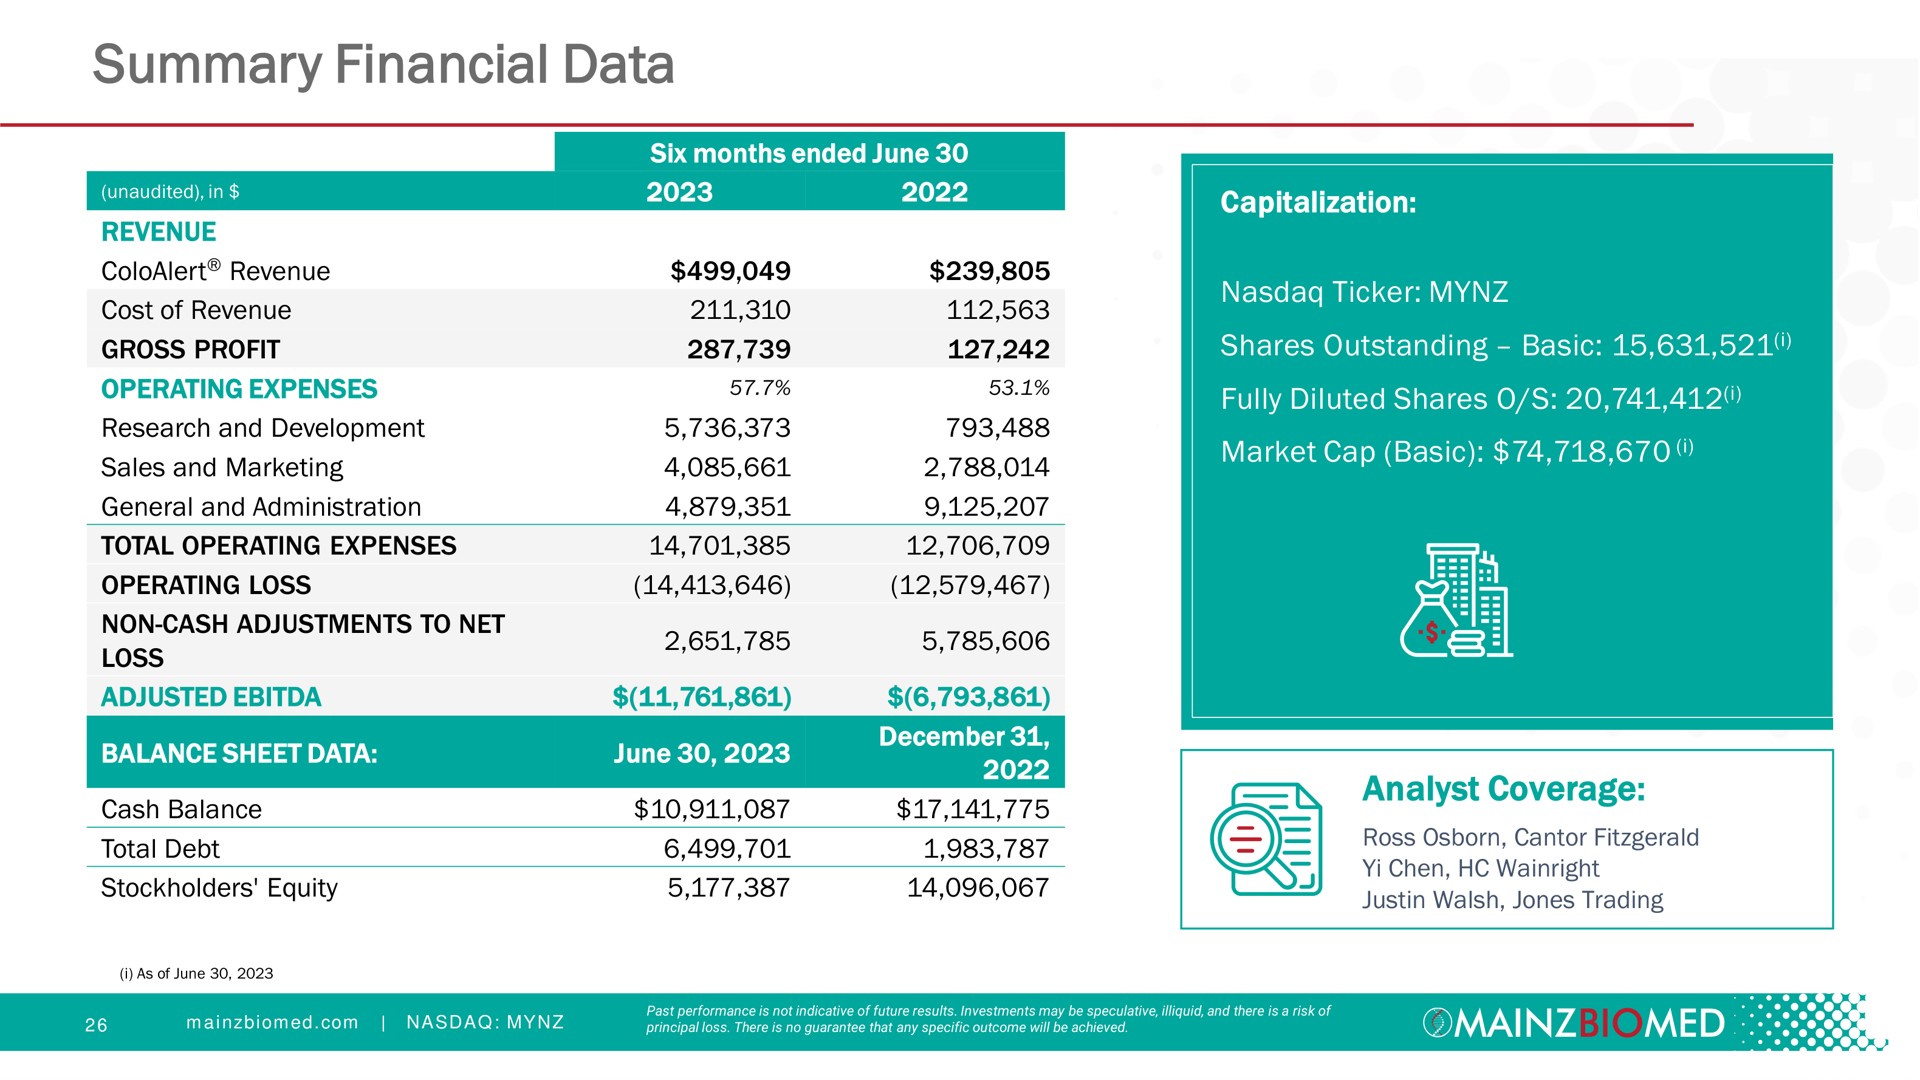 summary financial data sales and marketing balance sheet on lope fully diluted shares as a pyres | Mainz Biomed NV